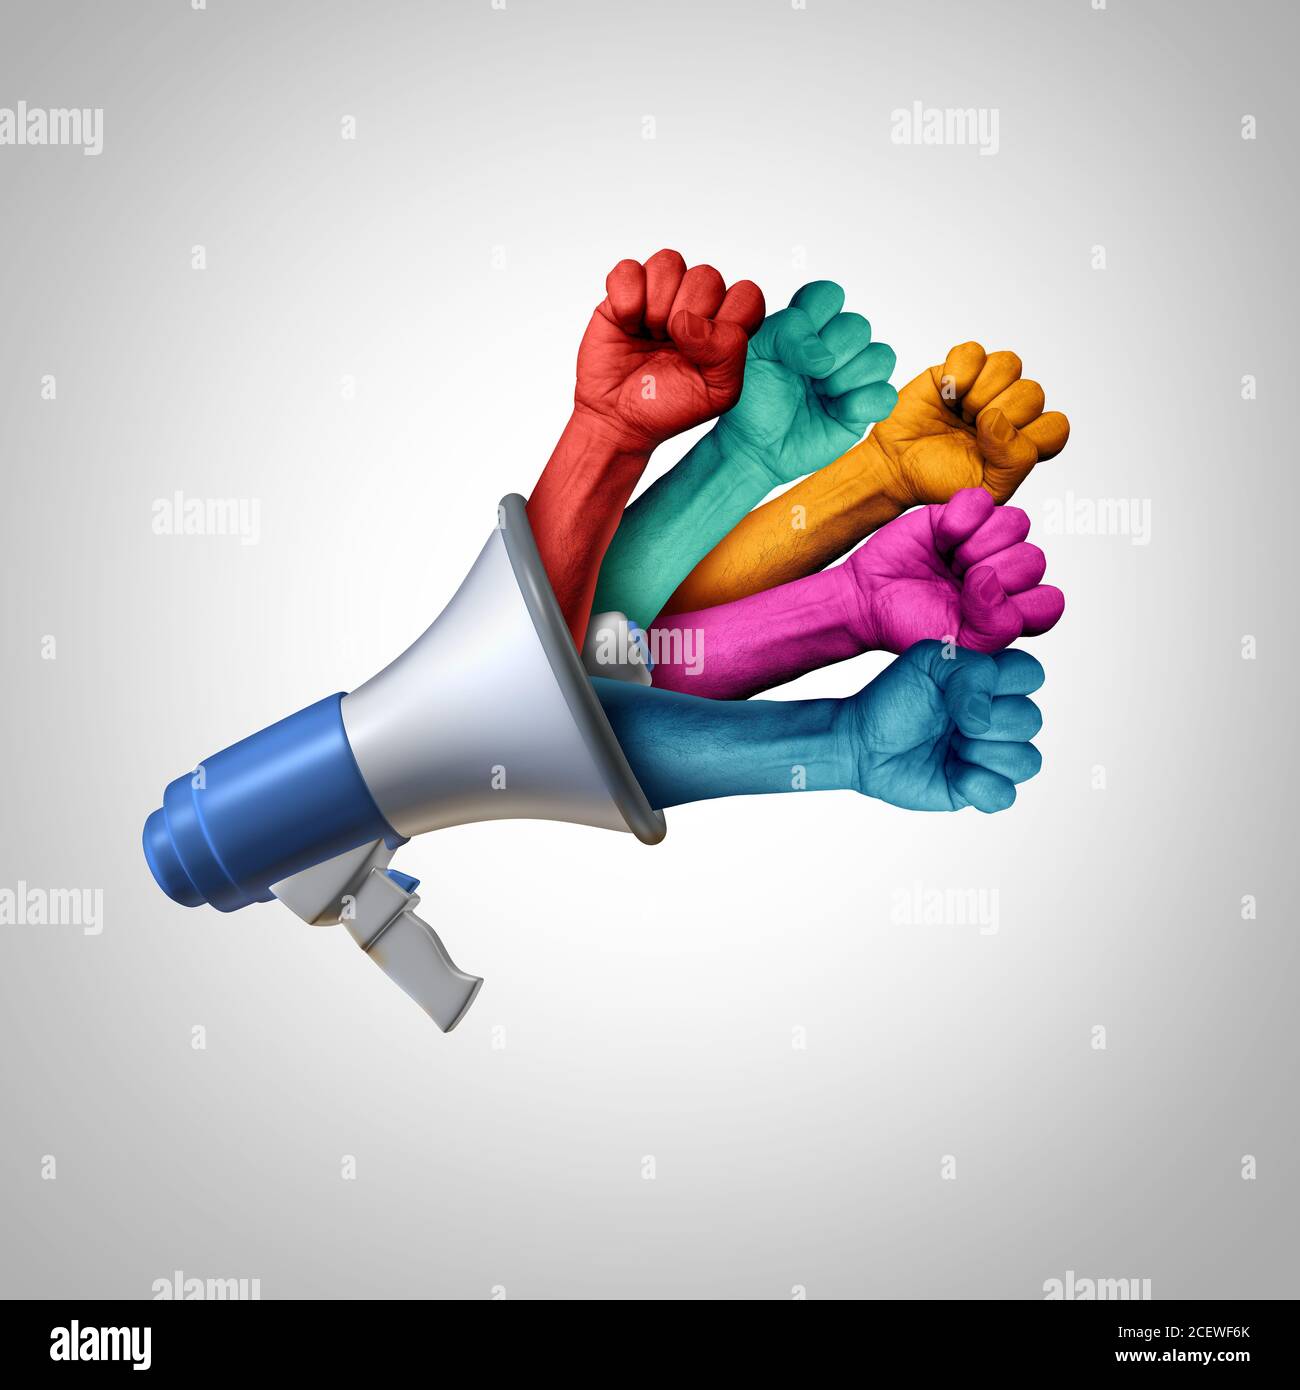 Social rights message and justice communication for equality and democracy with 3D illustration elements. Stock Photo